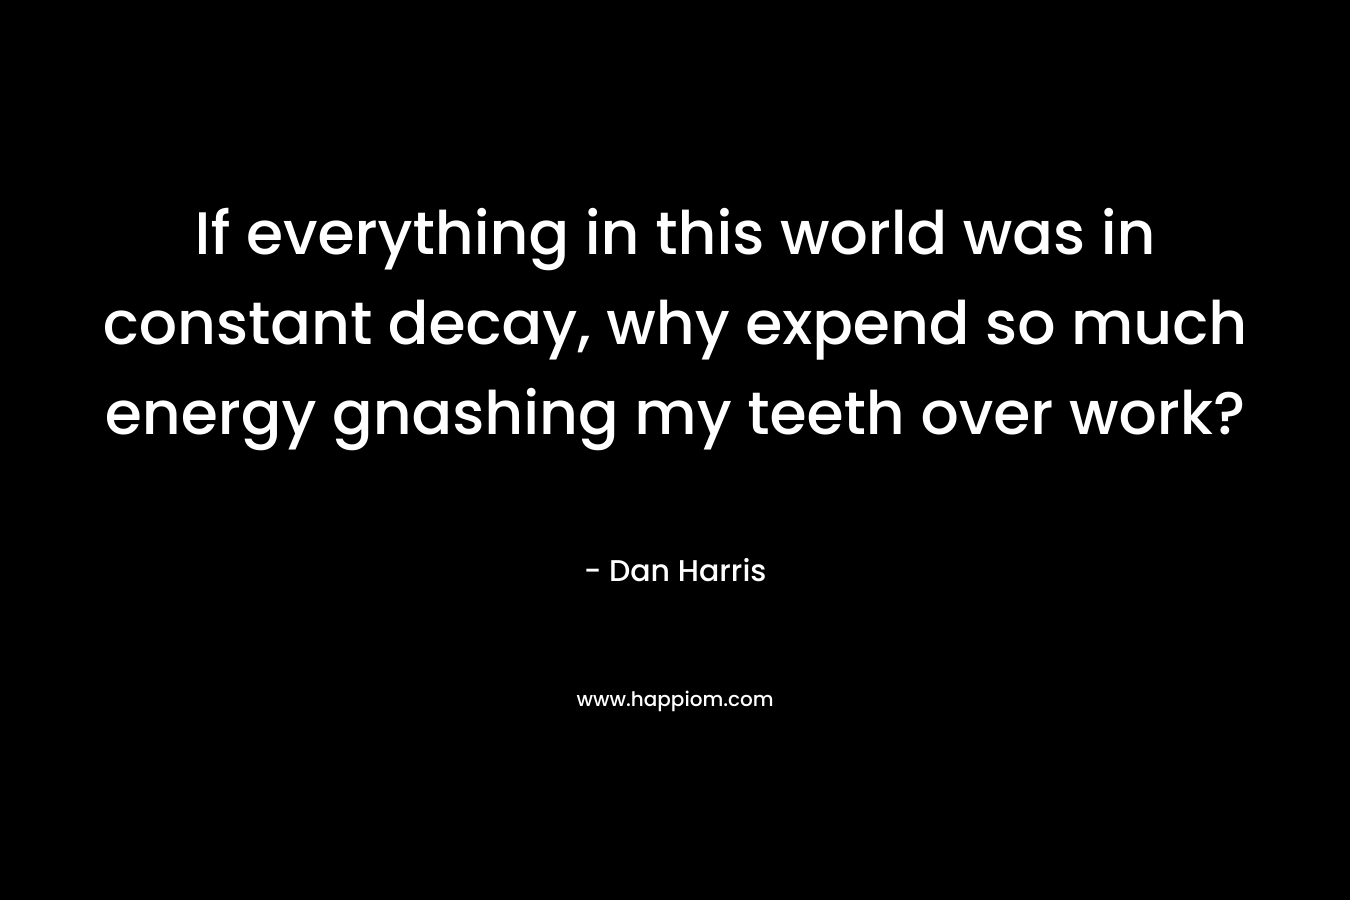 If everything in this world was in constant decay, why expend so much energy gnashing my teeth over work?